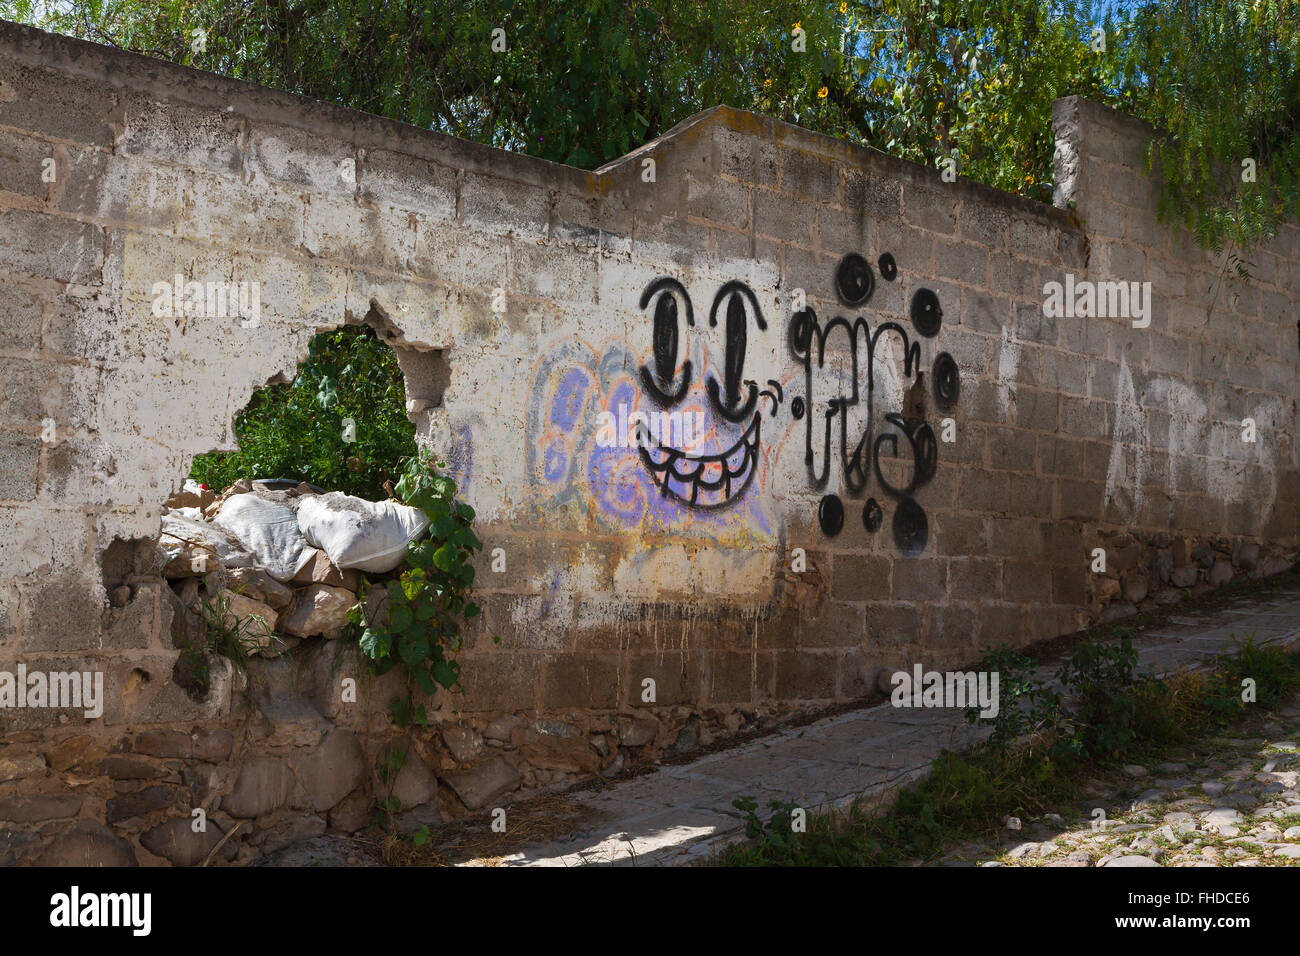 A smiley face on a delapidated wall in MINERAL DE POZOS one of MEXICOS MAGICAL TOWNS Stock Photo